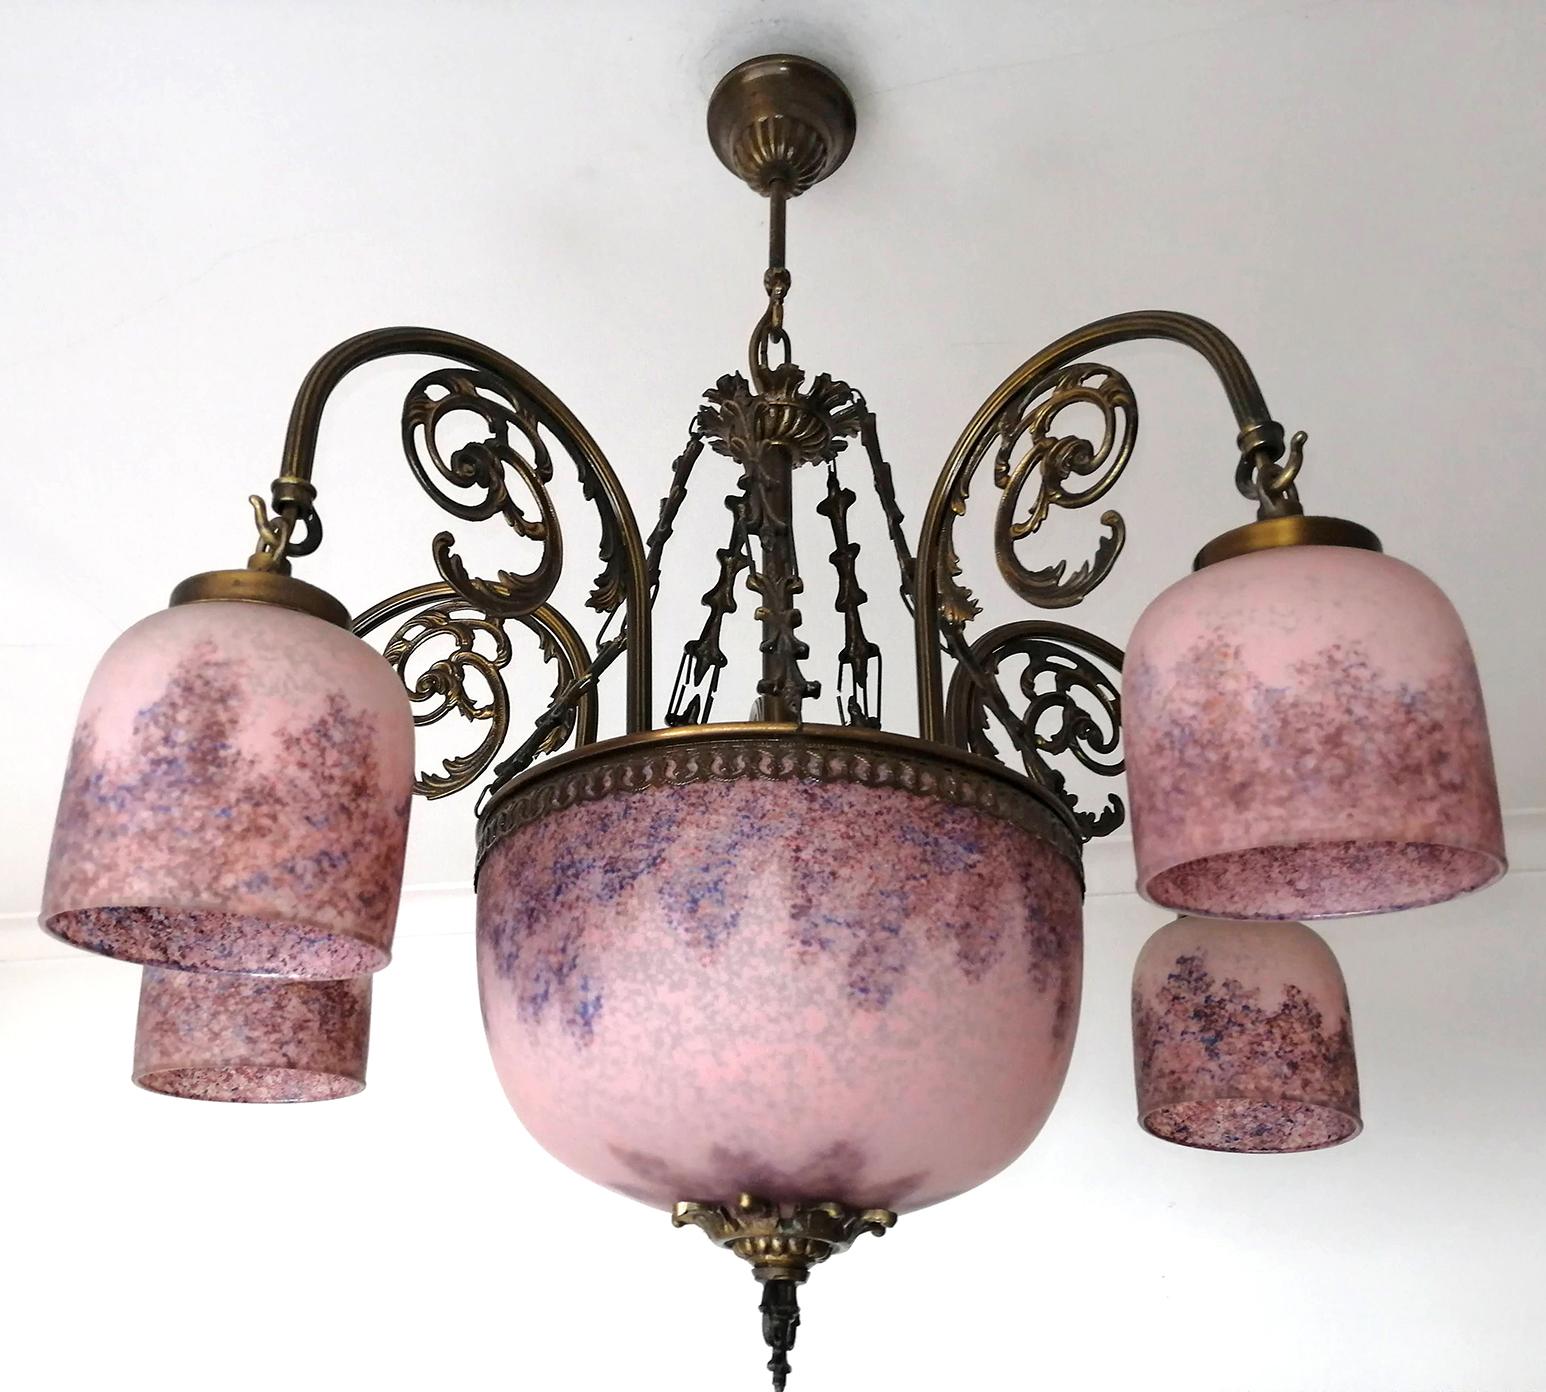 Beautiful original French Art Deco chandelier. It features a brass base and polychrome art glass hand blown shades, in hues of pink, blue and purple.
Dimensions
Height 29.53 in. (75 cm)
Diameter 25.99 in. (66 cm)
7 light bulbs E 14 / good